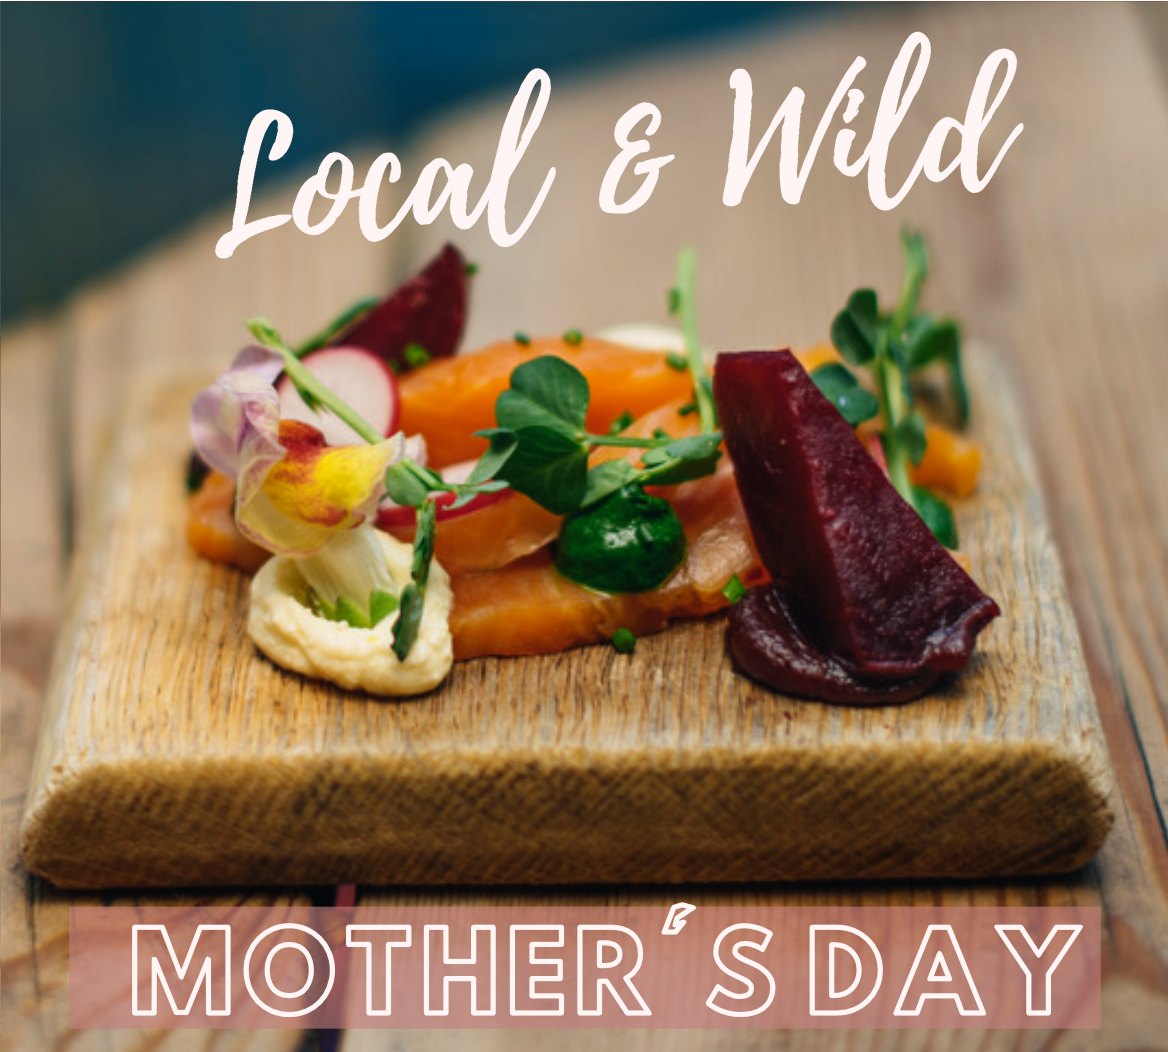 Mother's Day at Rabbit